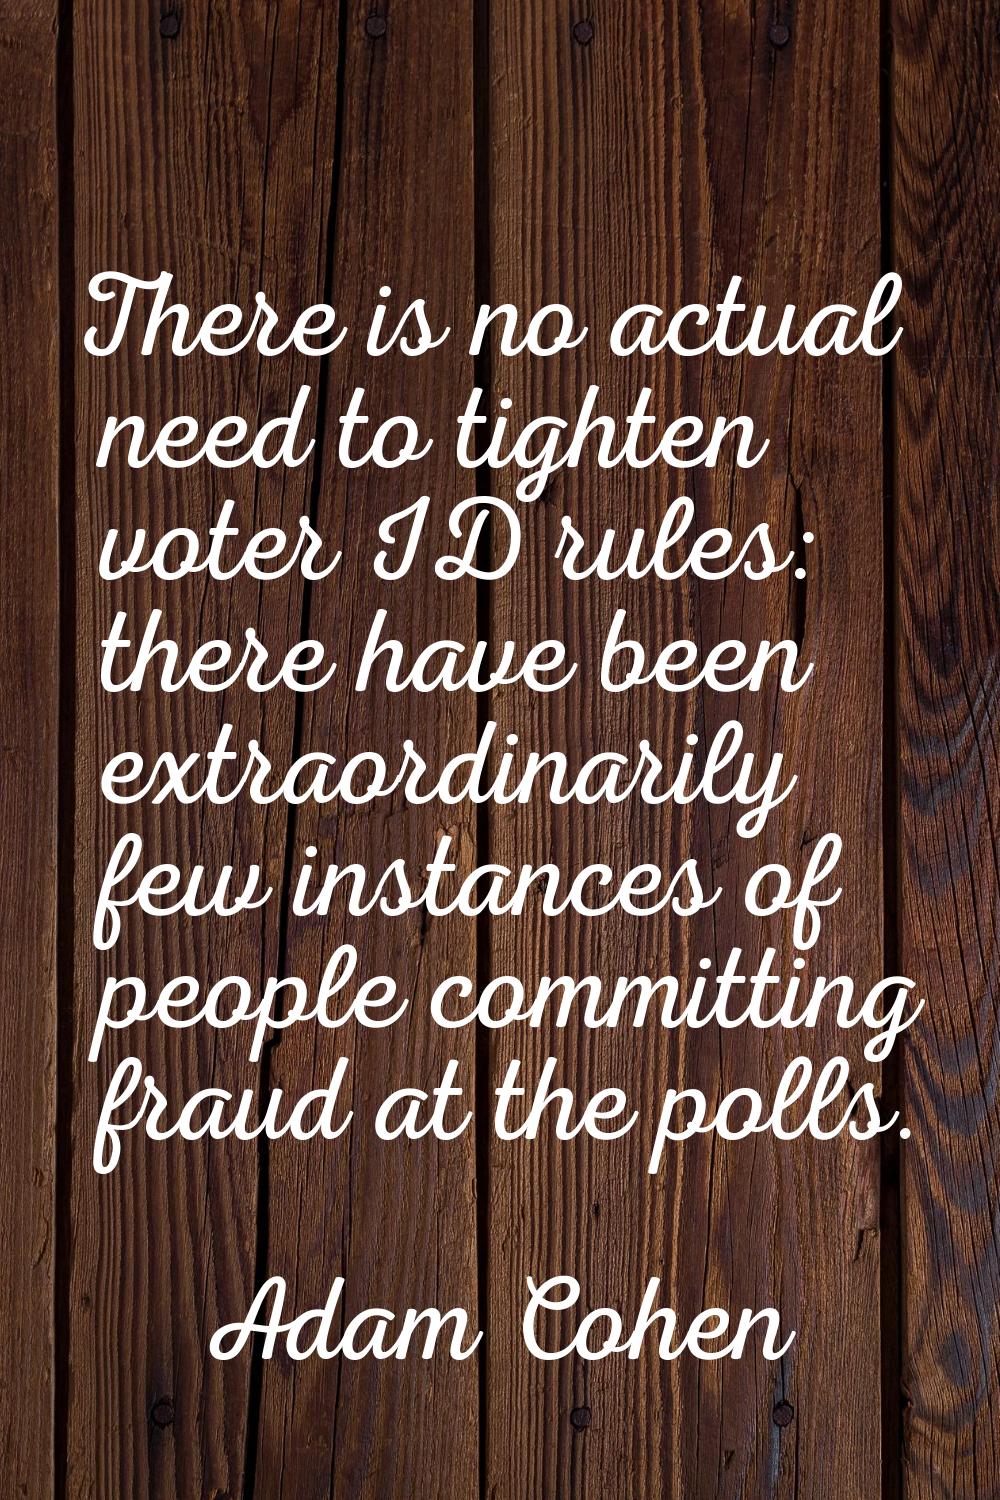 There is no actual need to tighten voter ID rules: there have been extraordinarily few instances of